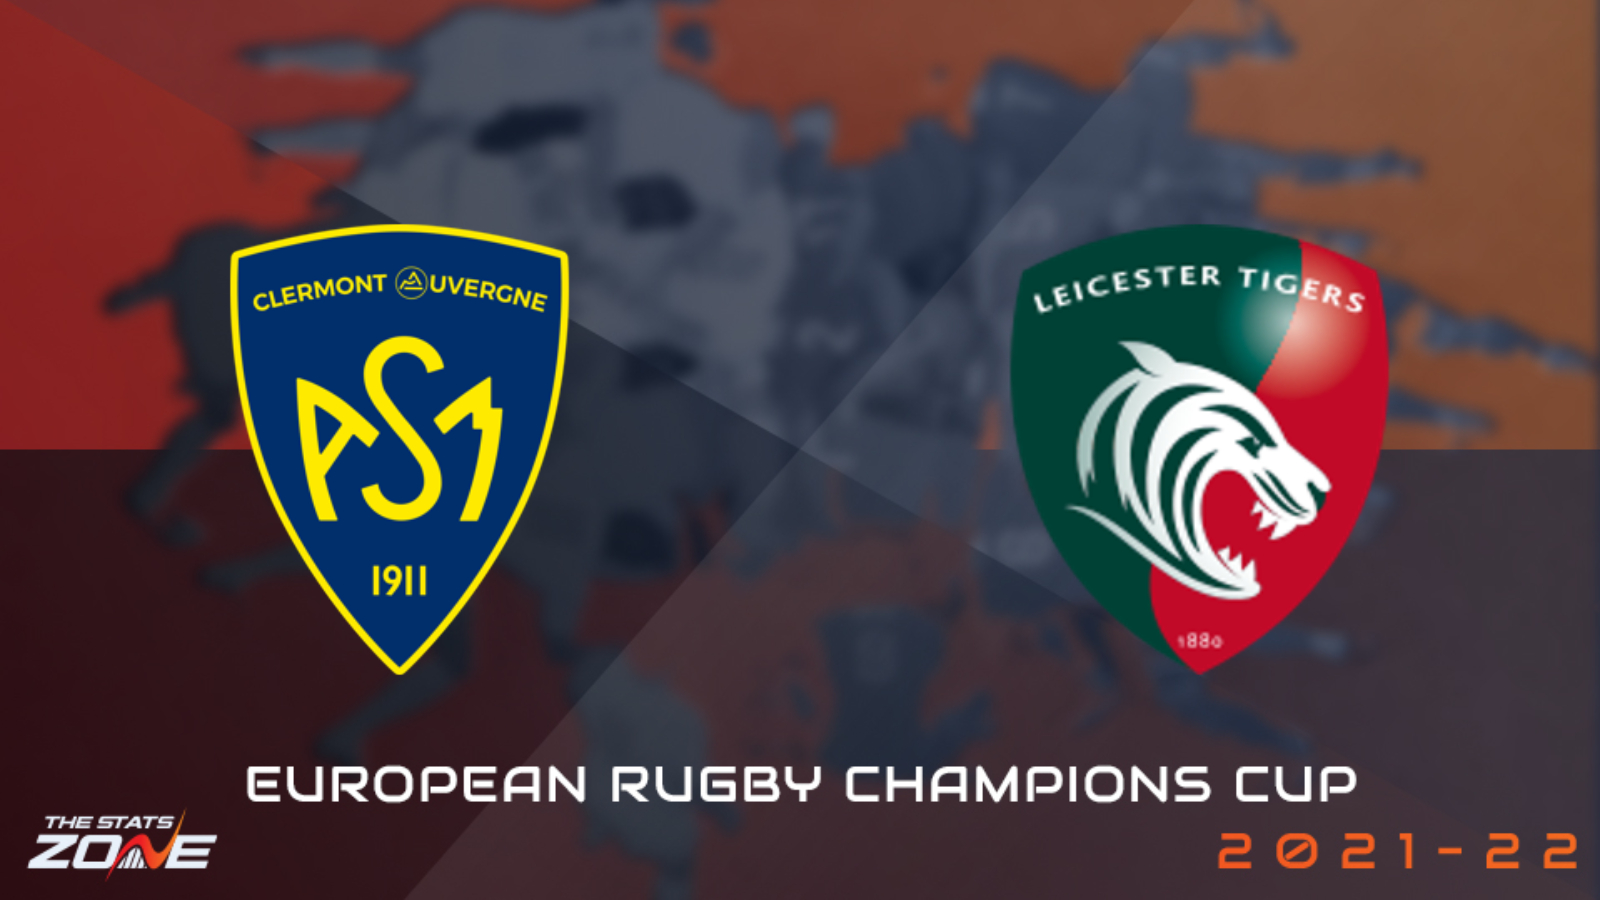 ASM Clermont Auvergne vs Leicester Tigers Preview and Prediction